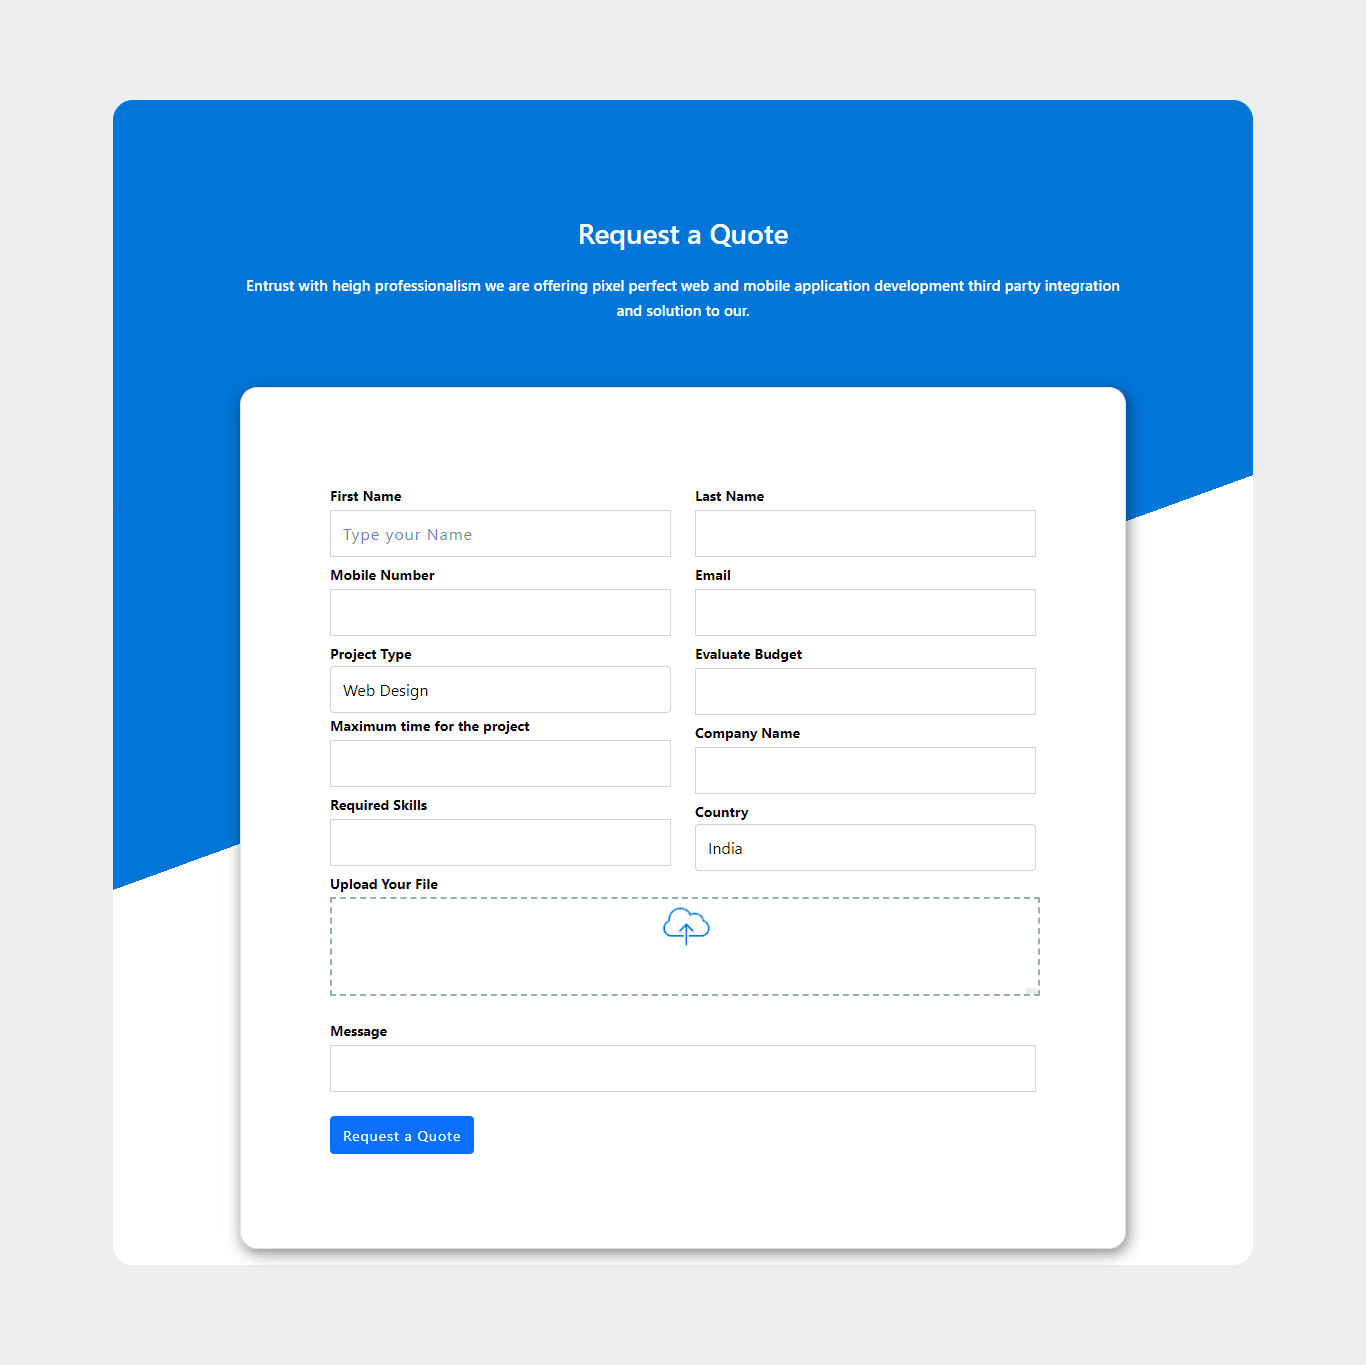 request a quote form with upload files